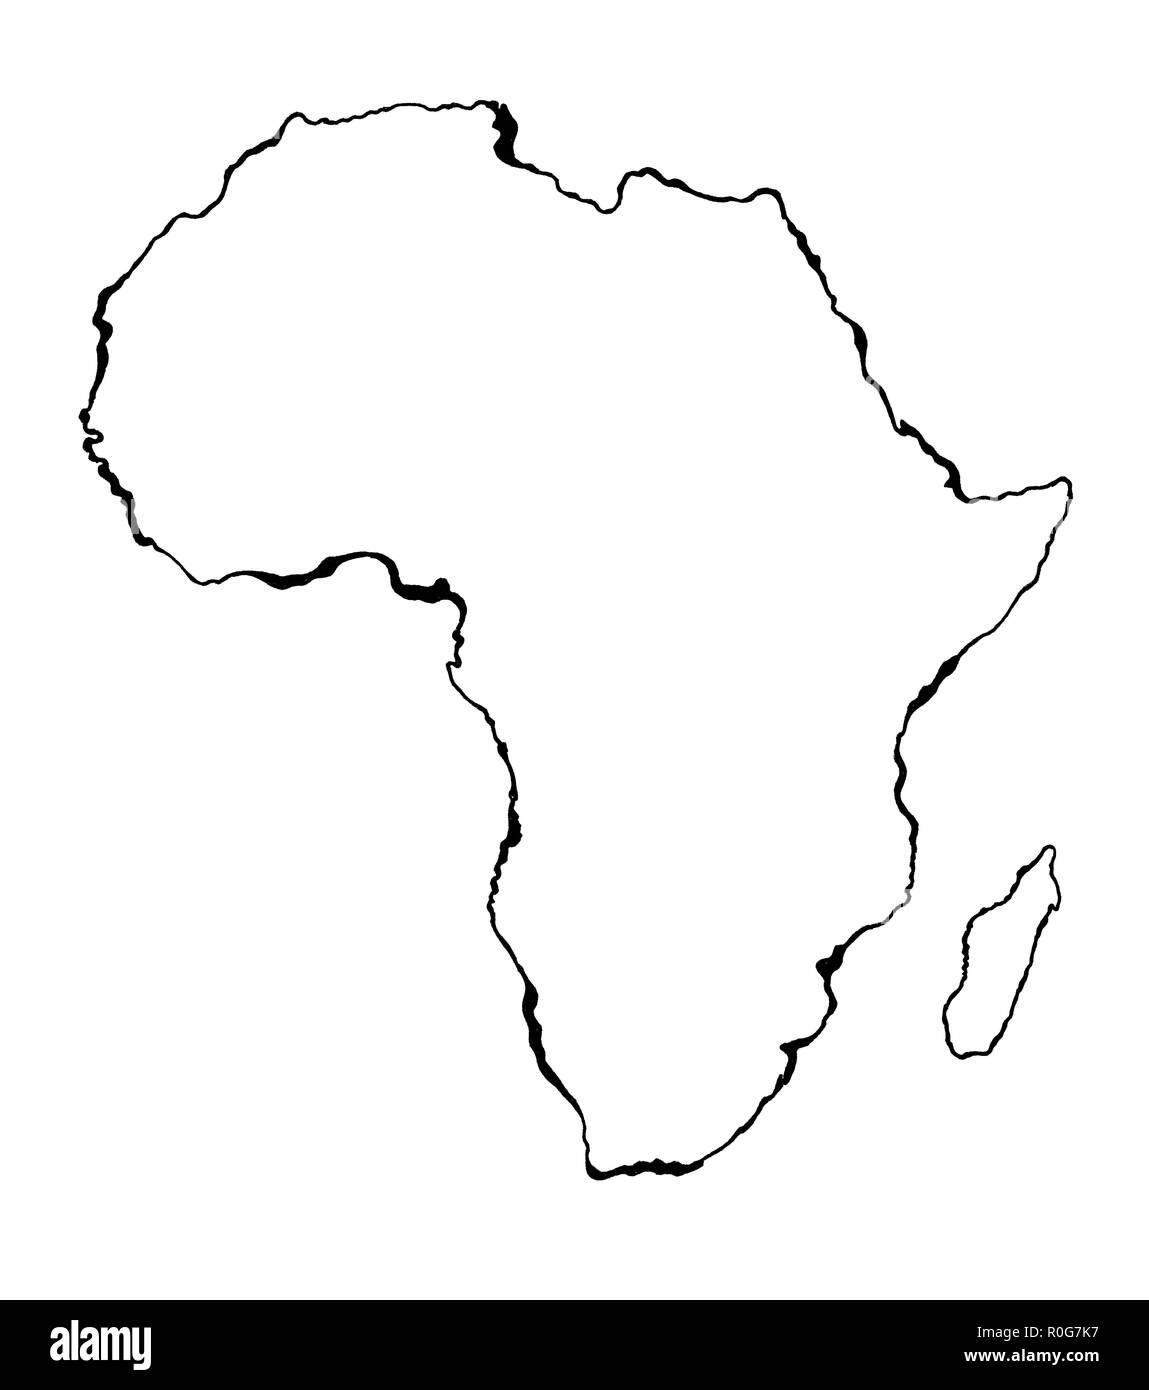 Hand drawn sketched Africa map (originals, no tracing) Stock Photo